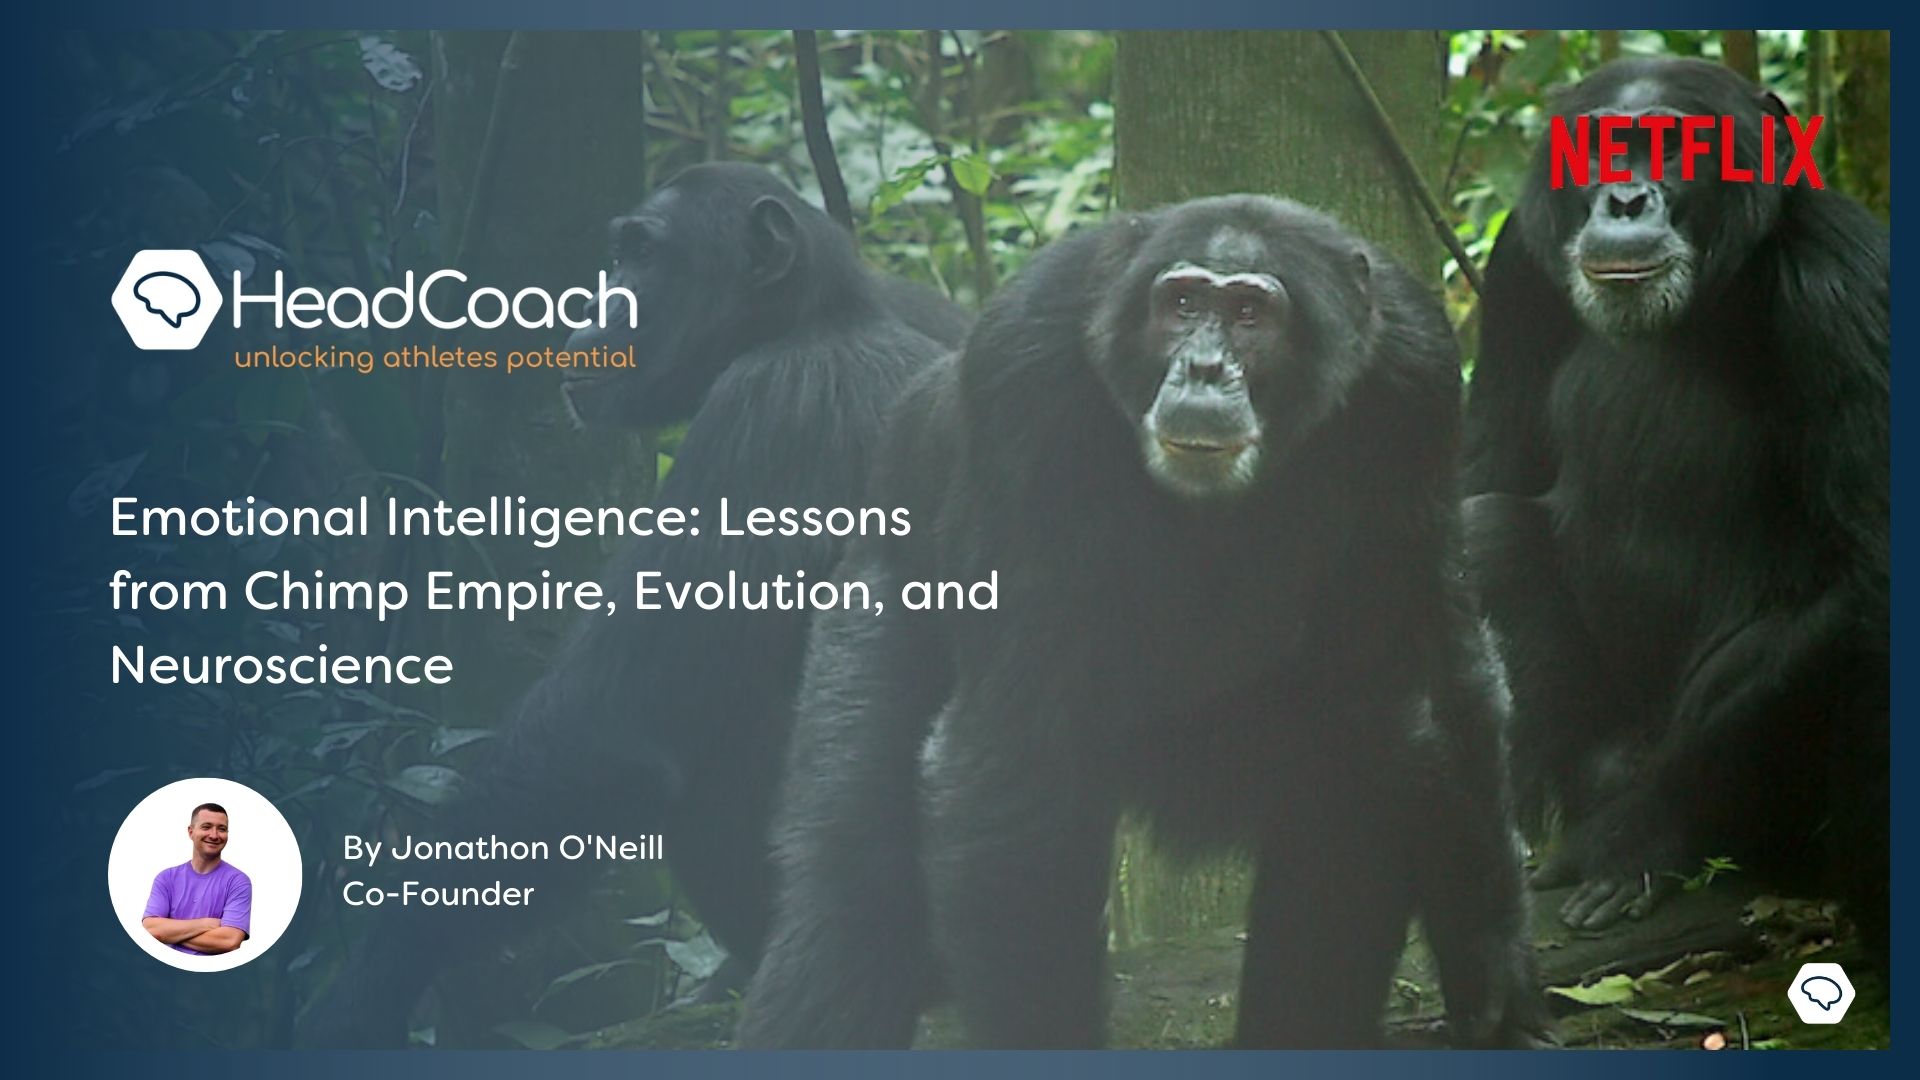 Emotional Intelligence: Lessons from Chimp Empire, Evolution, and Neuroscience